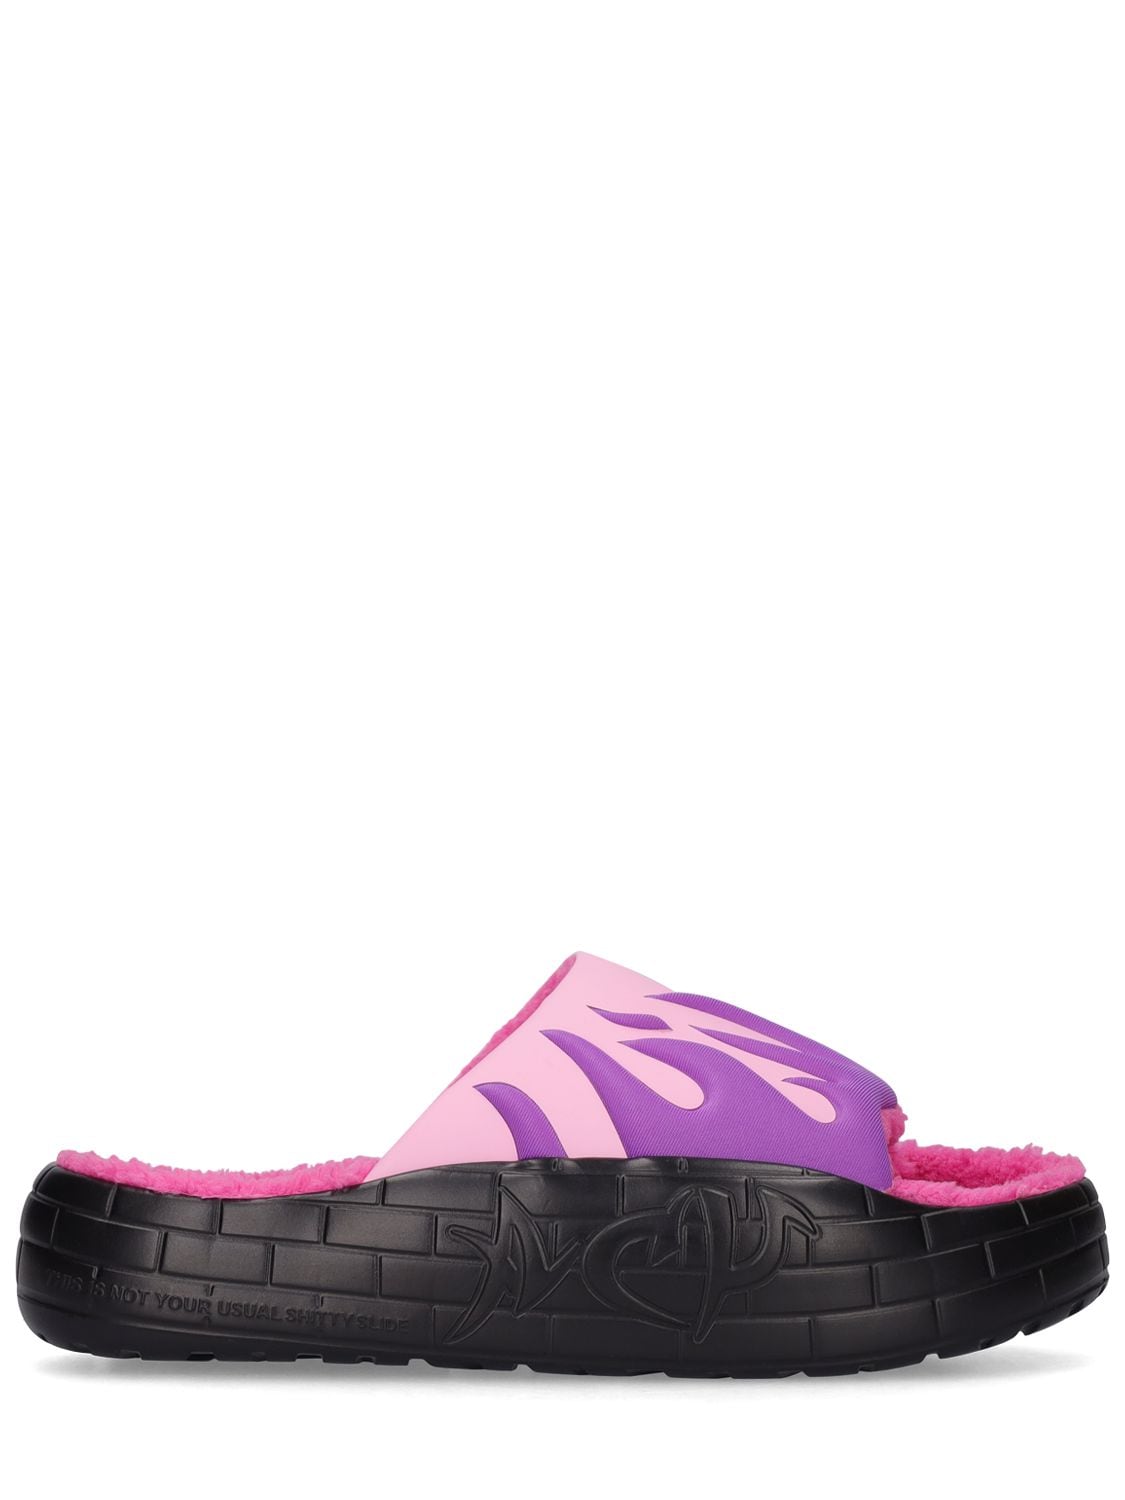 Acupuncture Nyu Flames Rubber Slide Sandals In Pink